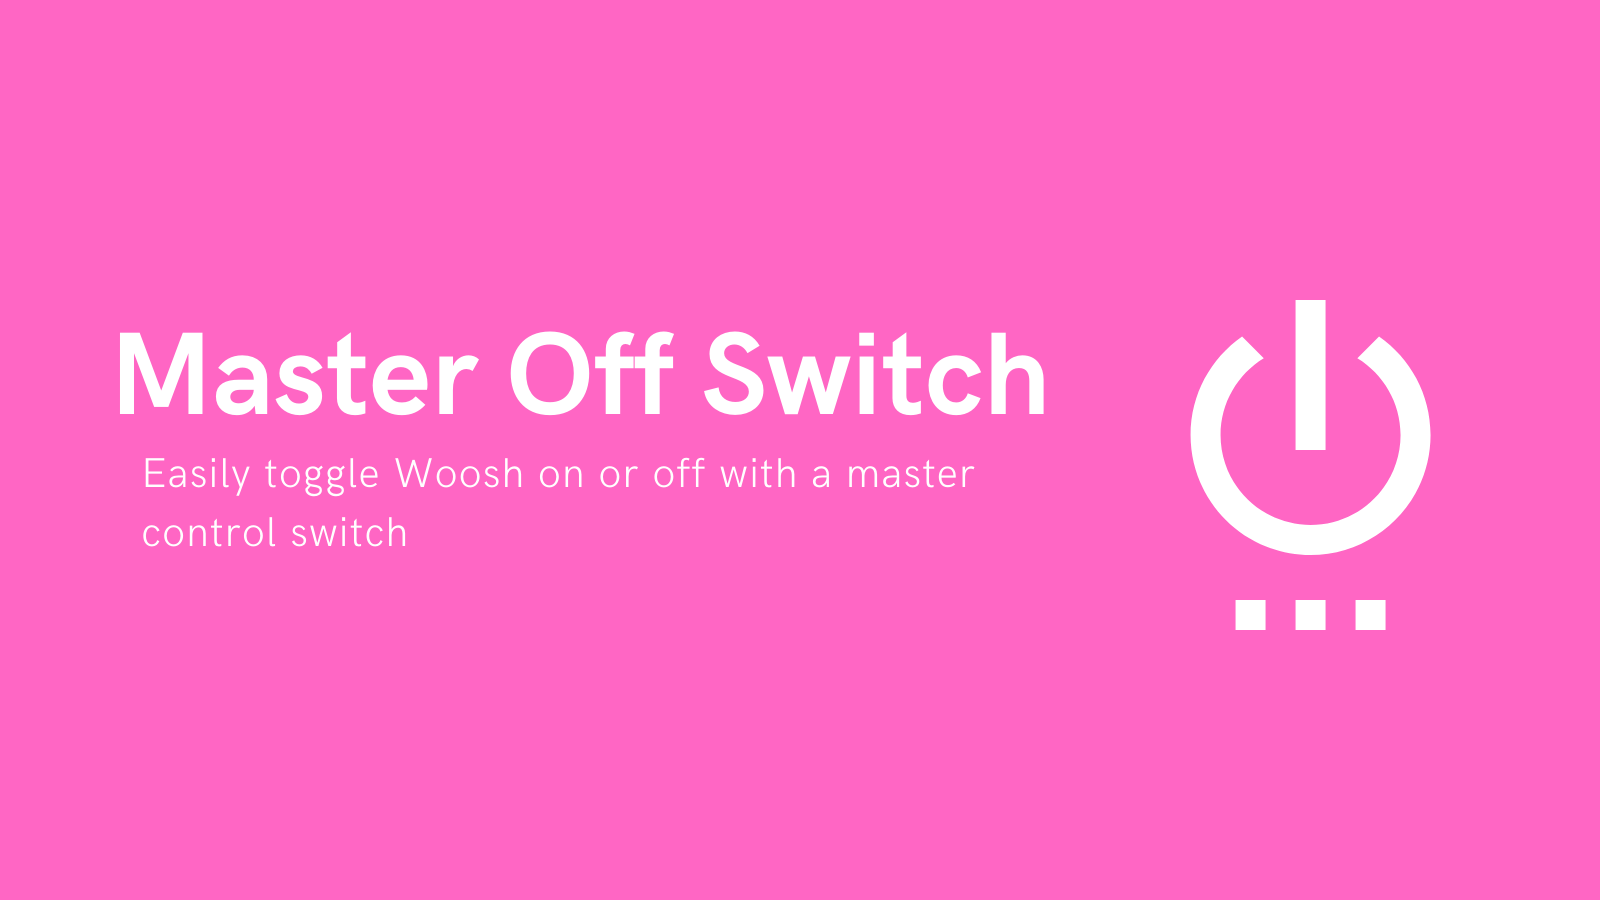 Toggle Woosh on & off easily